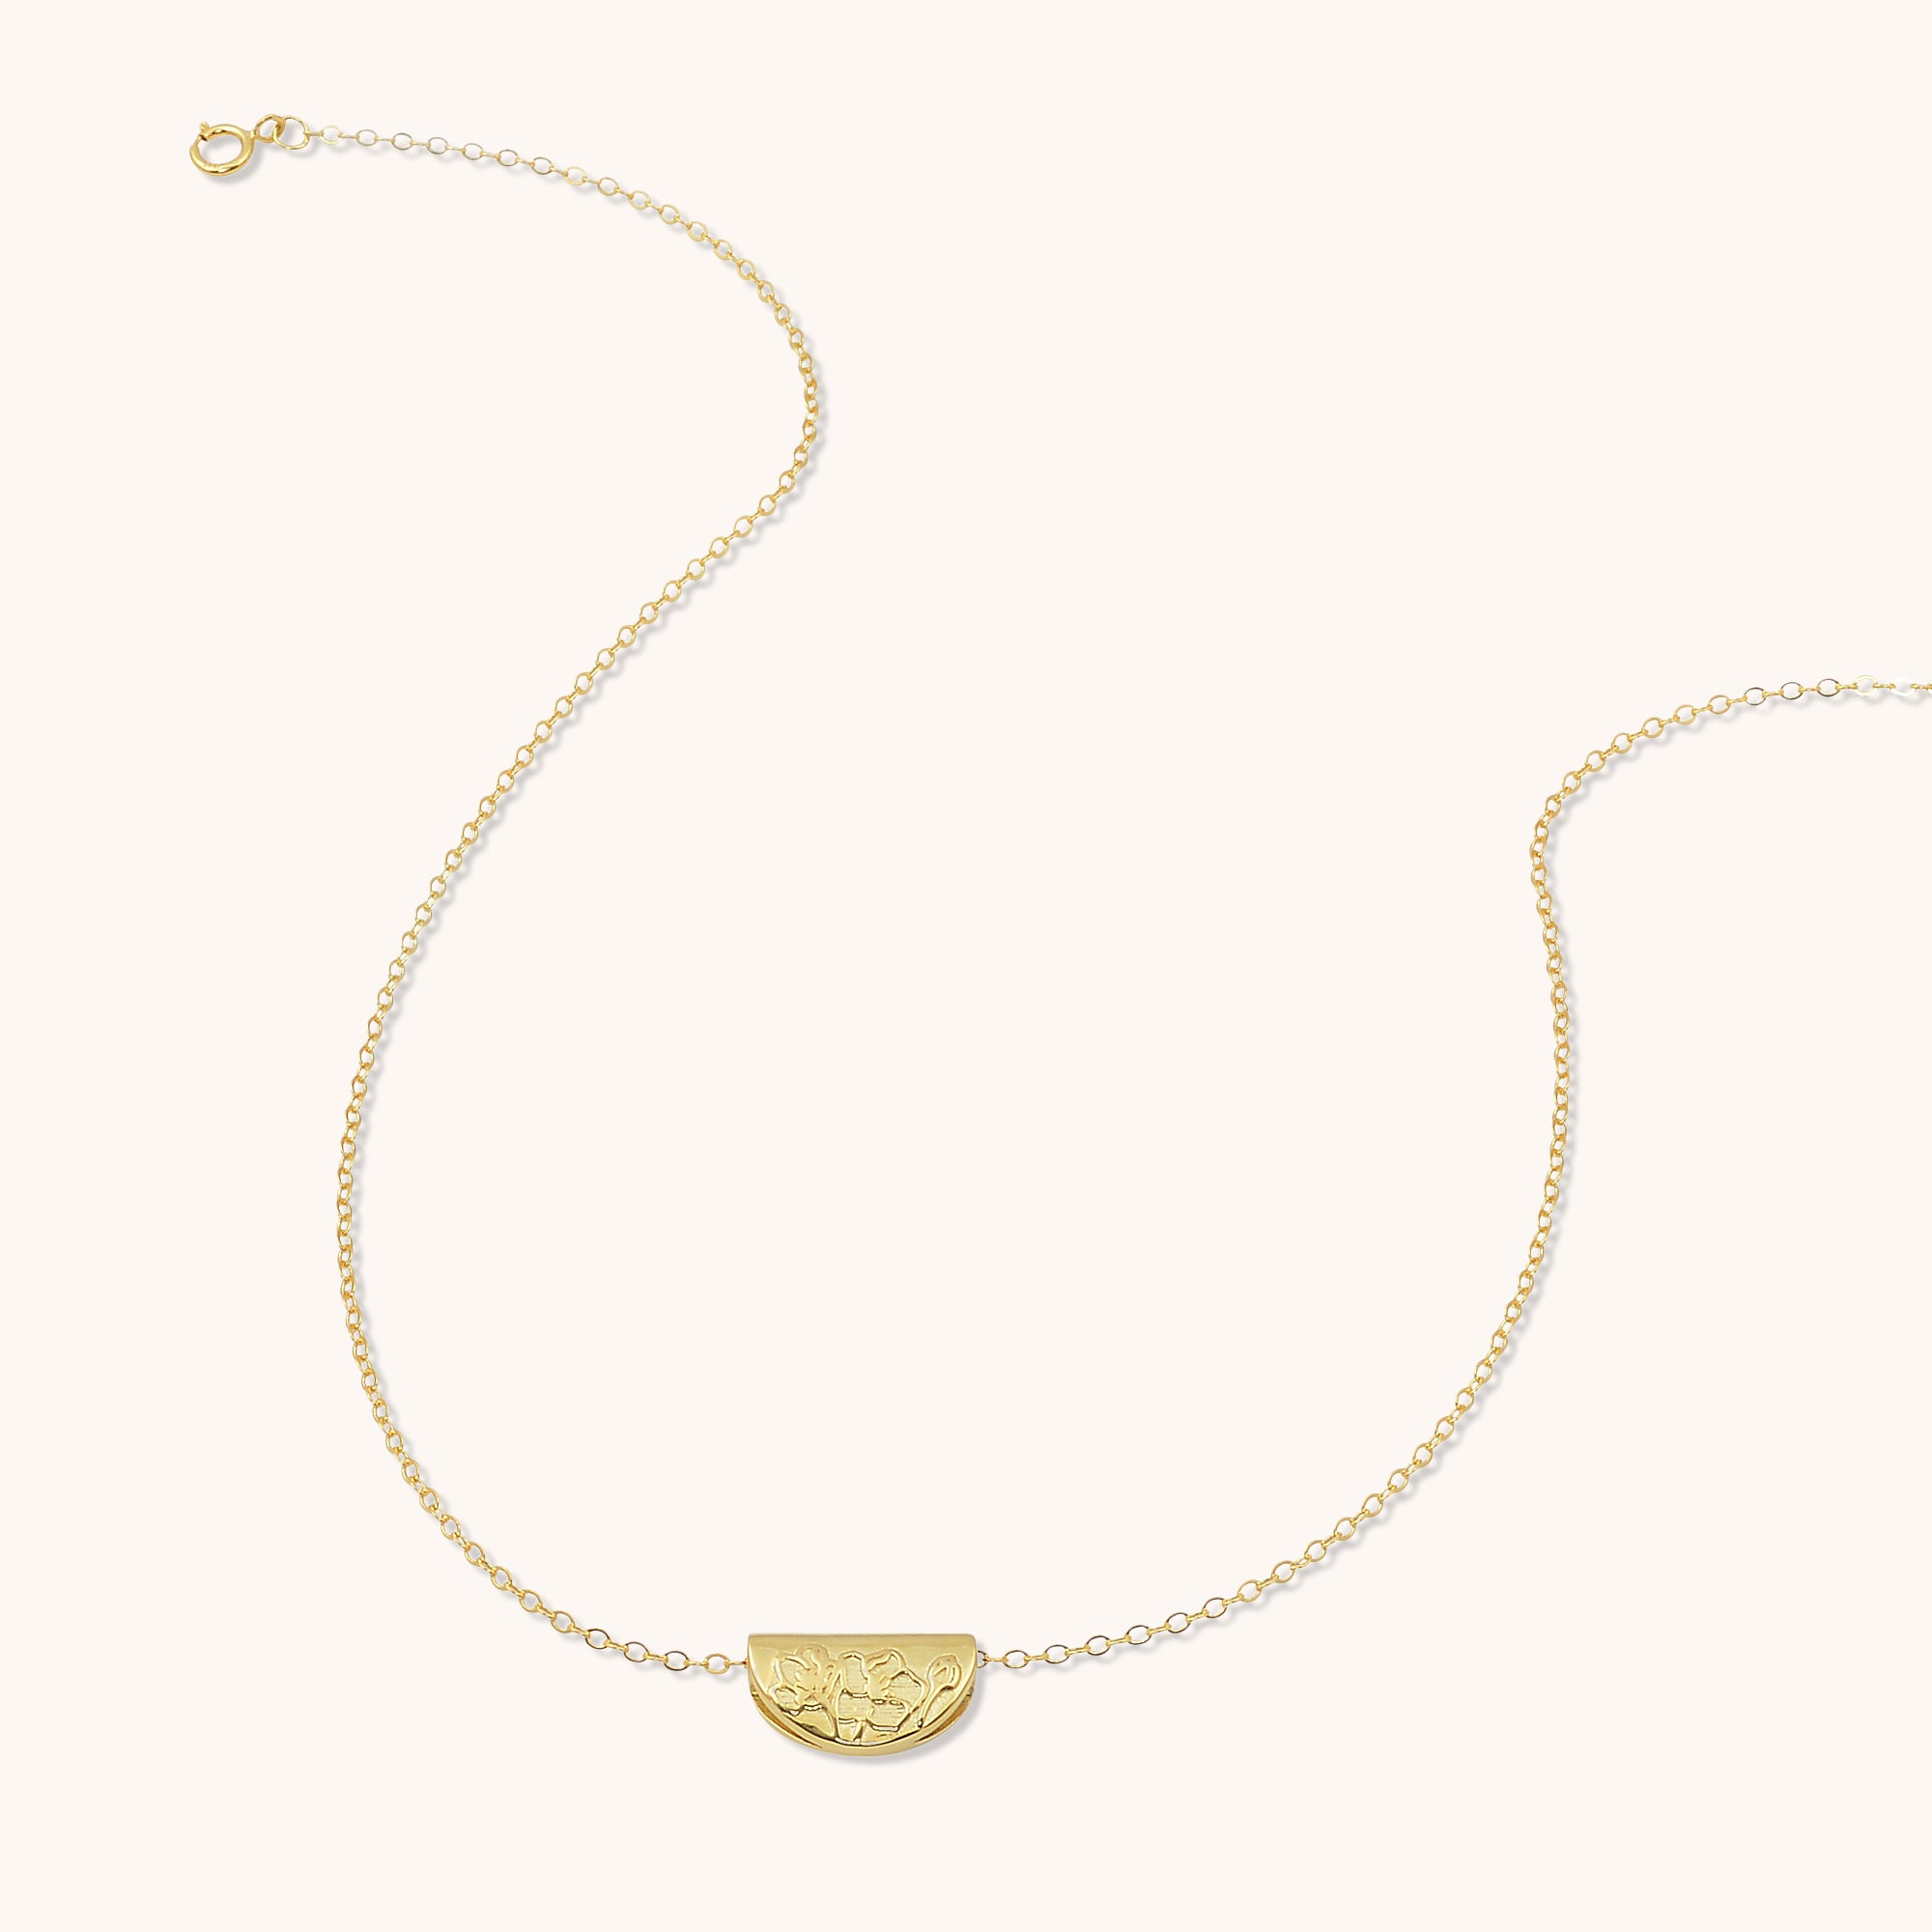 Birth Flower Necklace May (Hawthorn) Gold